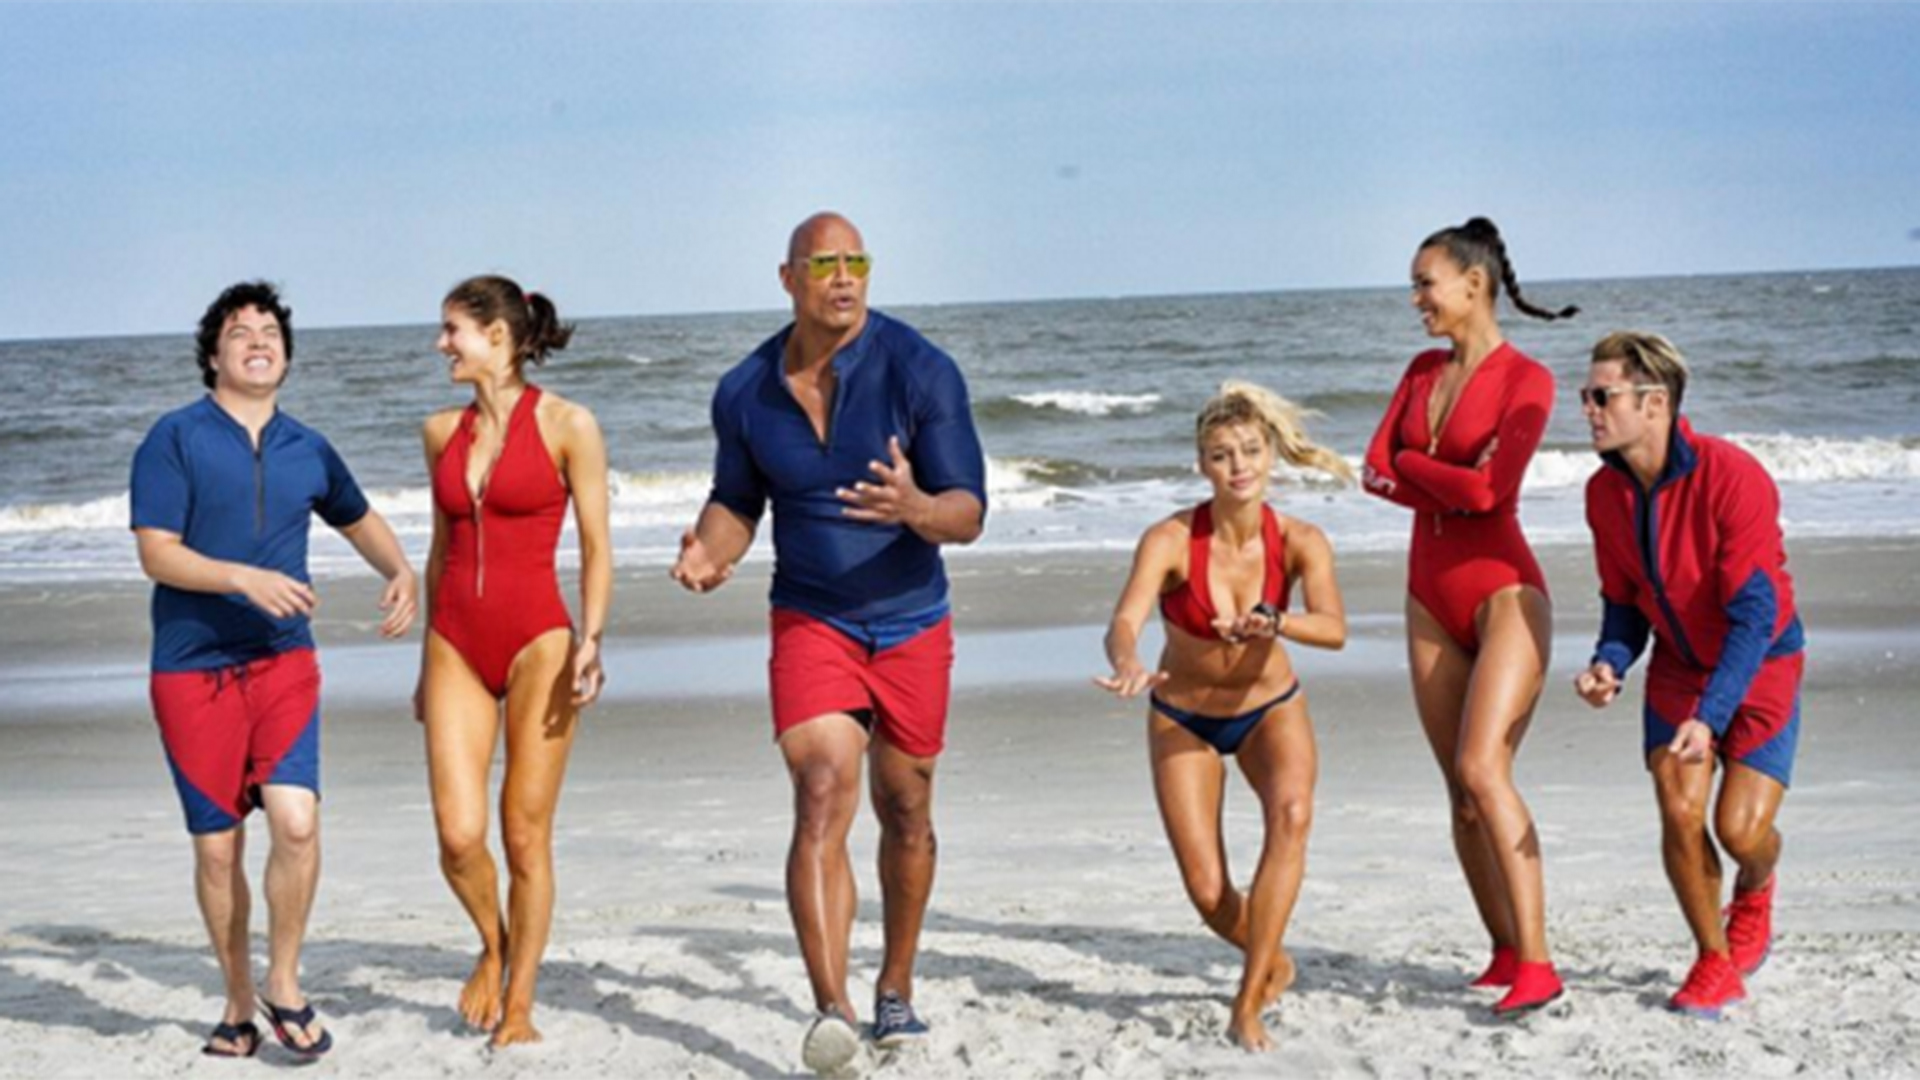 Baywatch Wallpapers and Background Images   stmednet